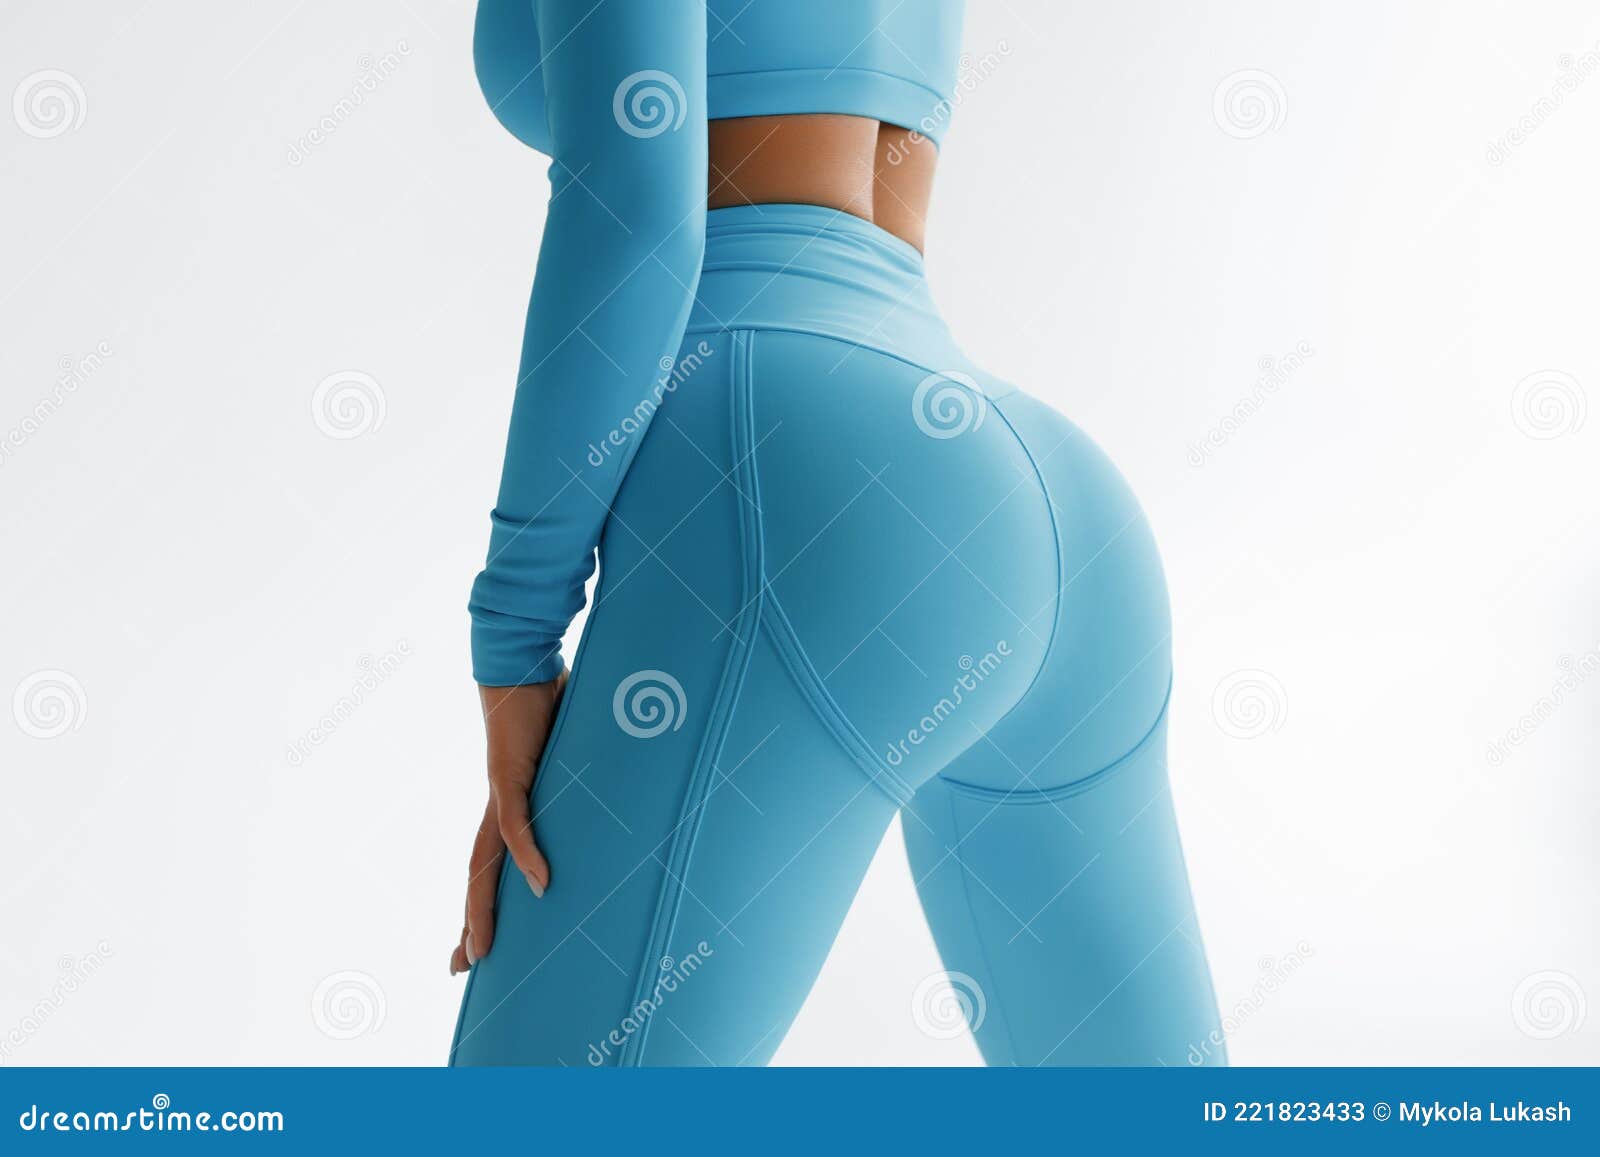 Big Booty In Tight Pants